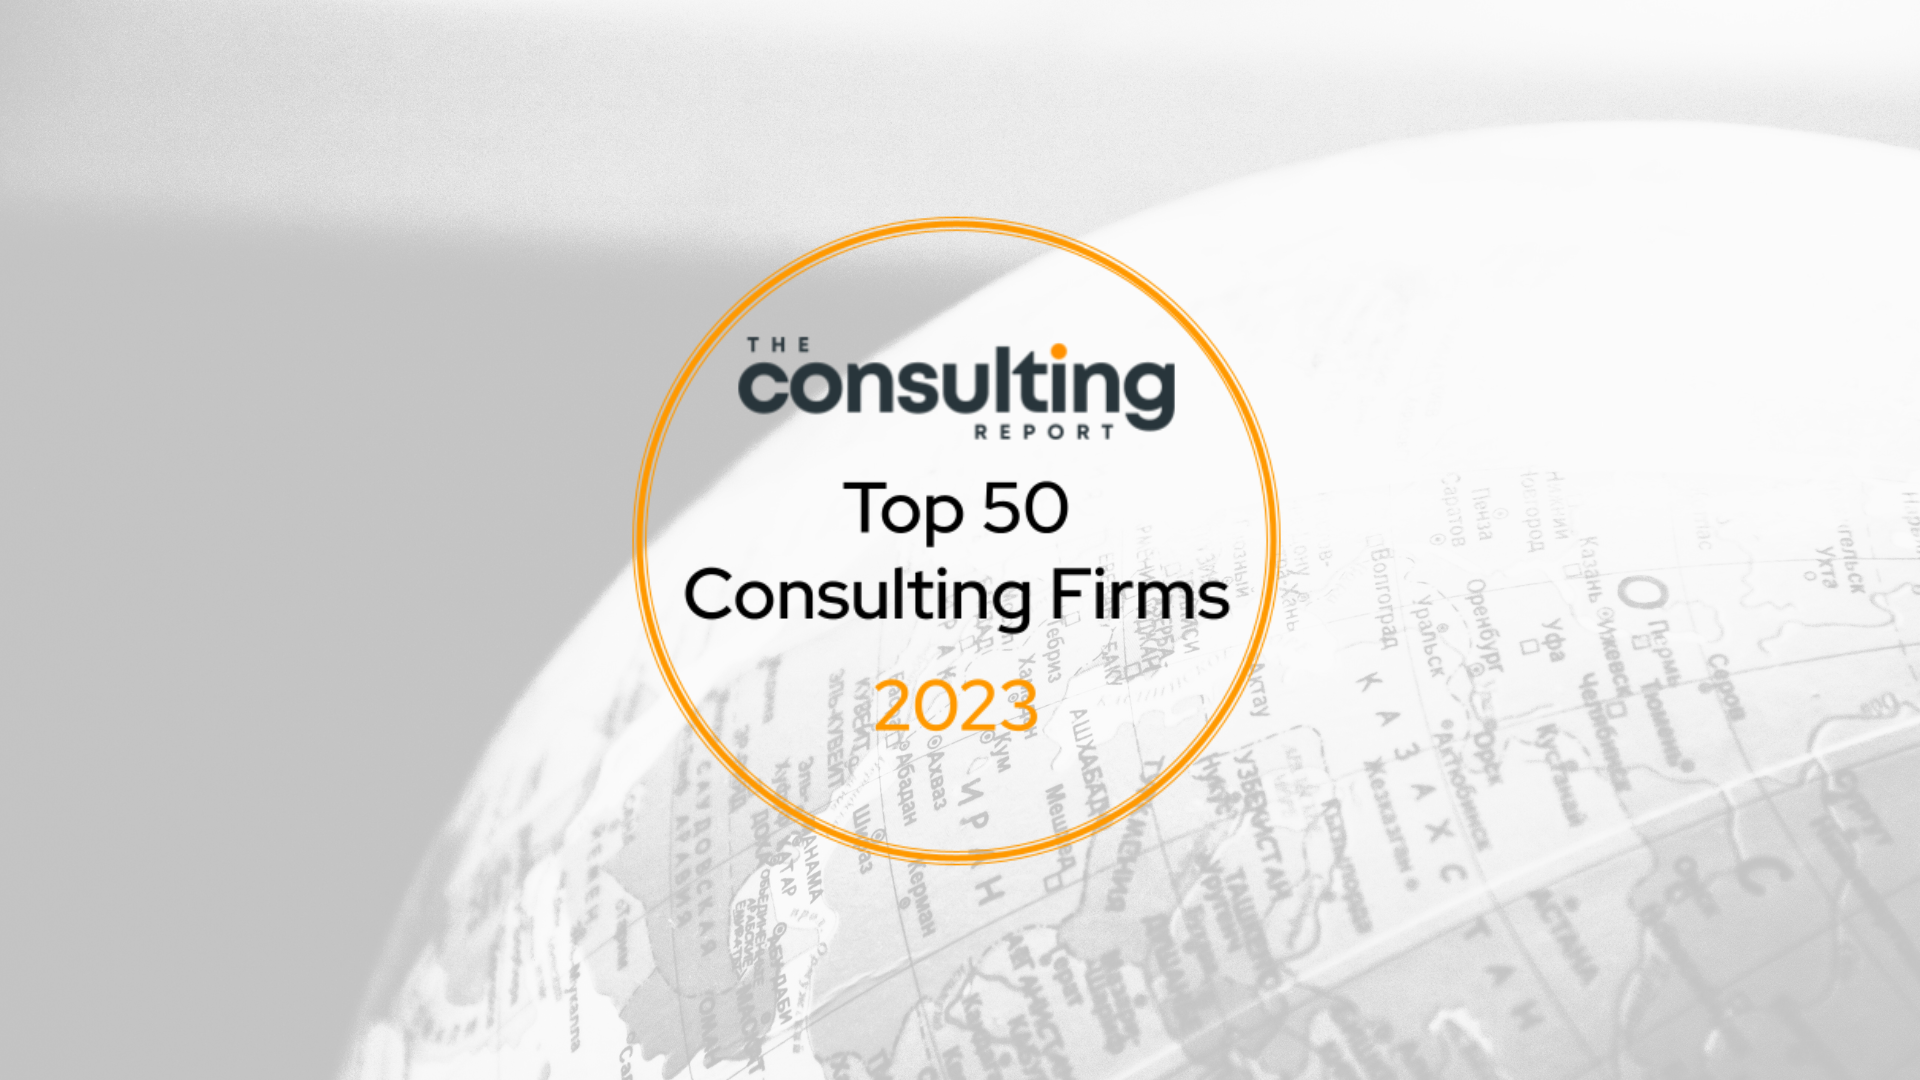 The Top 50 Consulting Firms of 2023